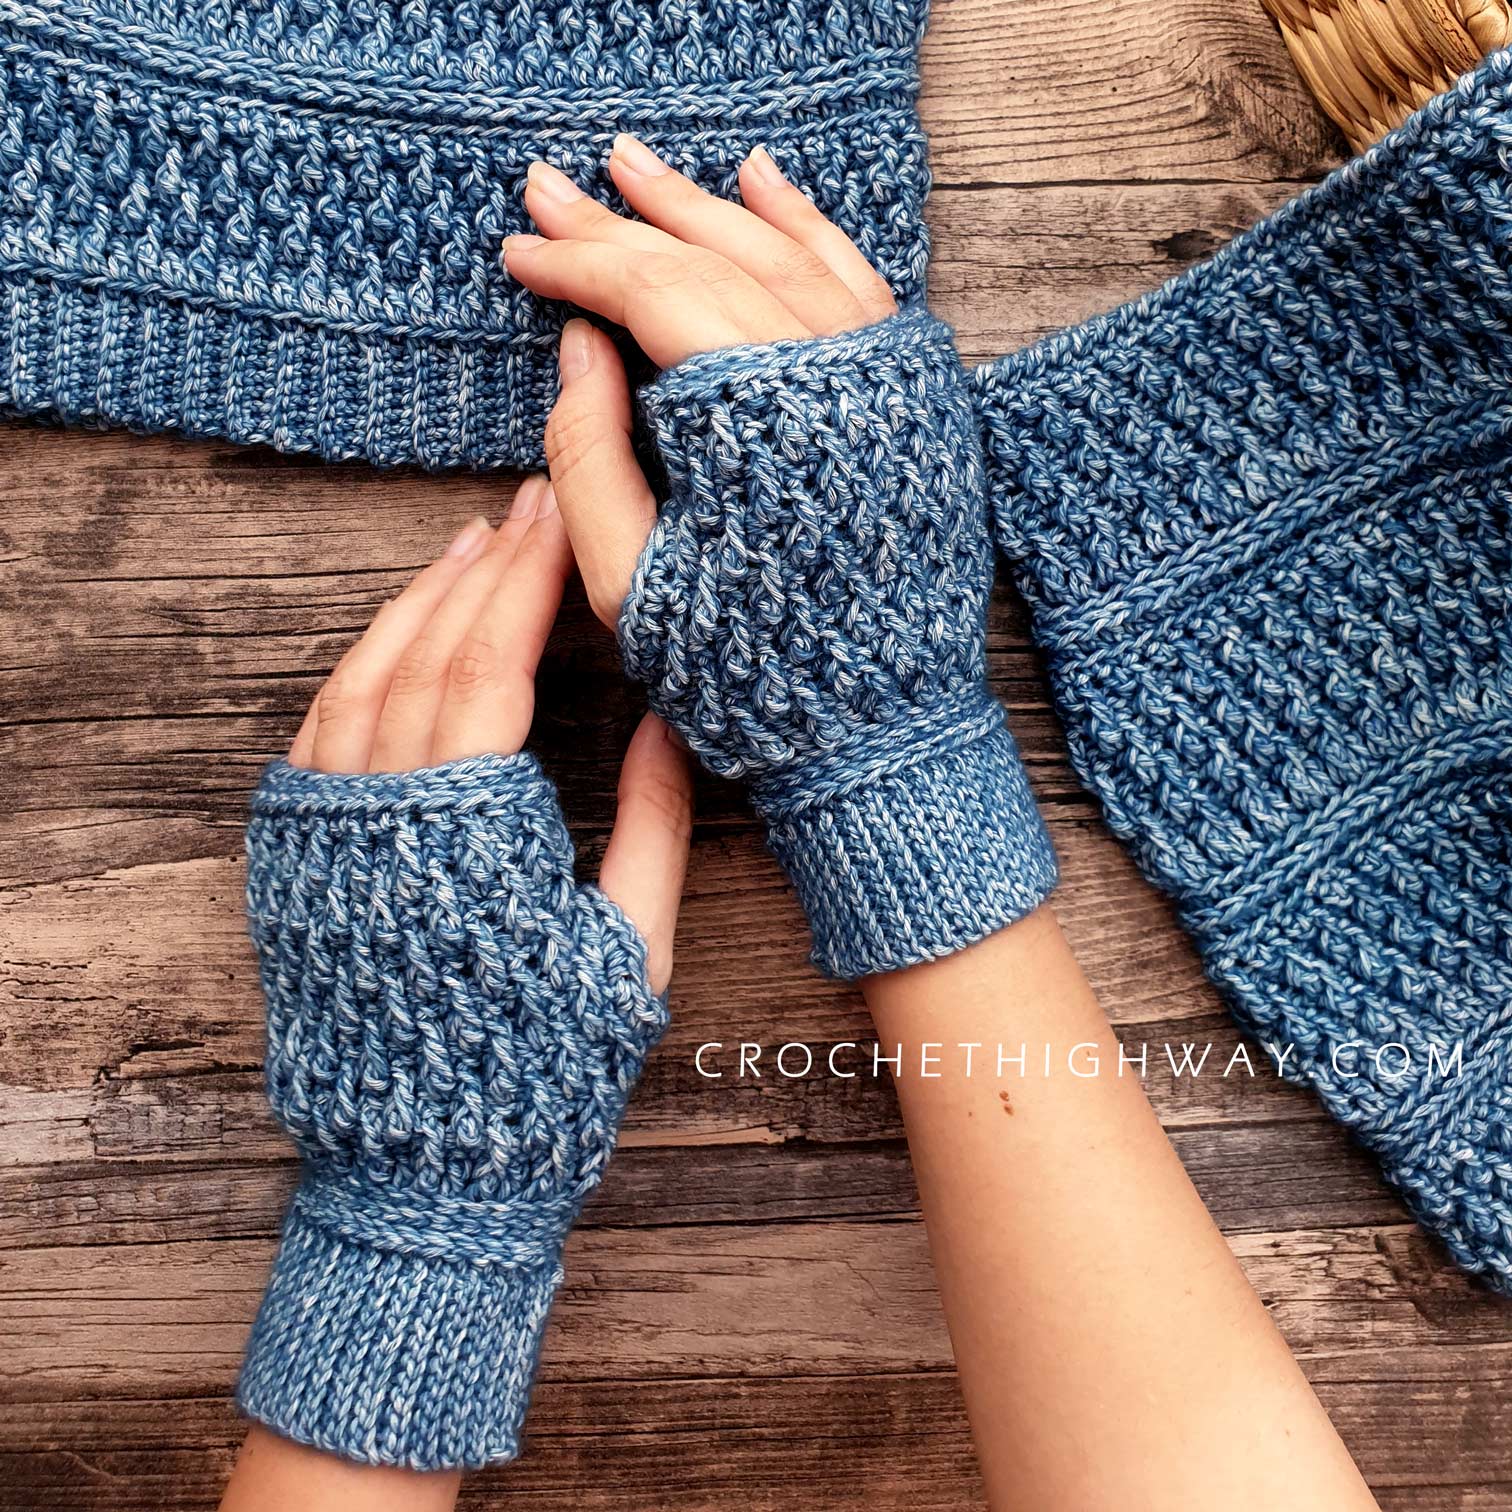 Knitting Patterns Galore - Fingerless Arm Warmers or Mitts – with Bows